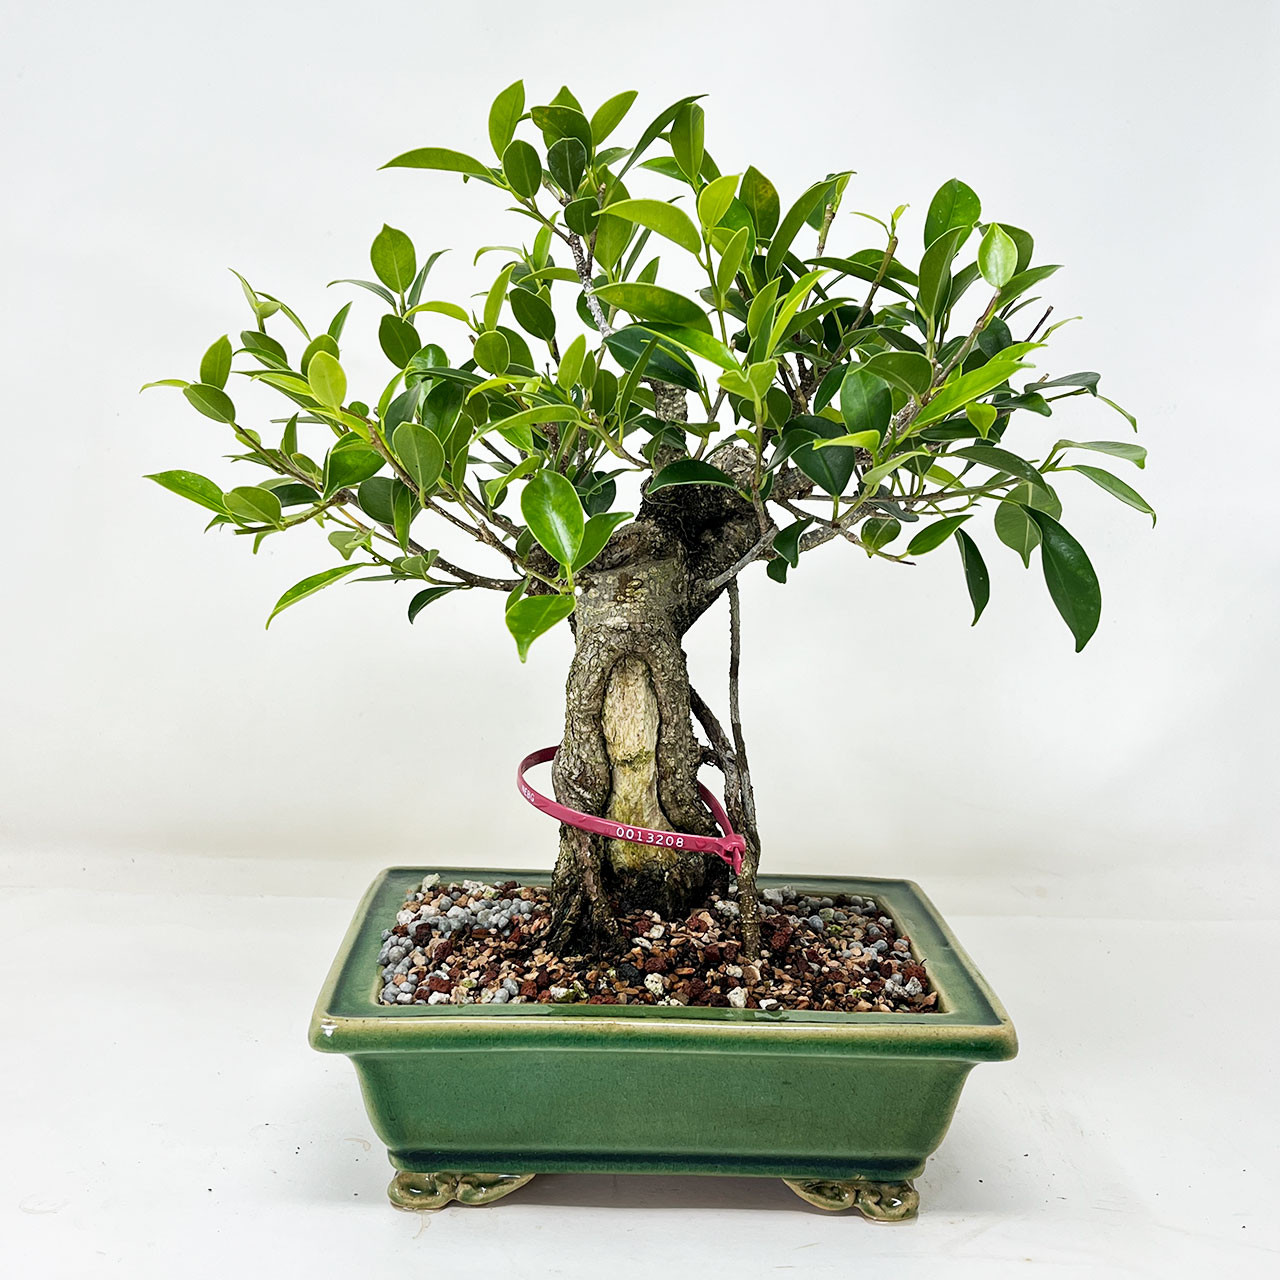 Imported Broom Style Tiger Bark Ficus with Air Roots, in a Yixing Ceramic  pot Pot. No. 13208